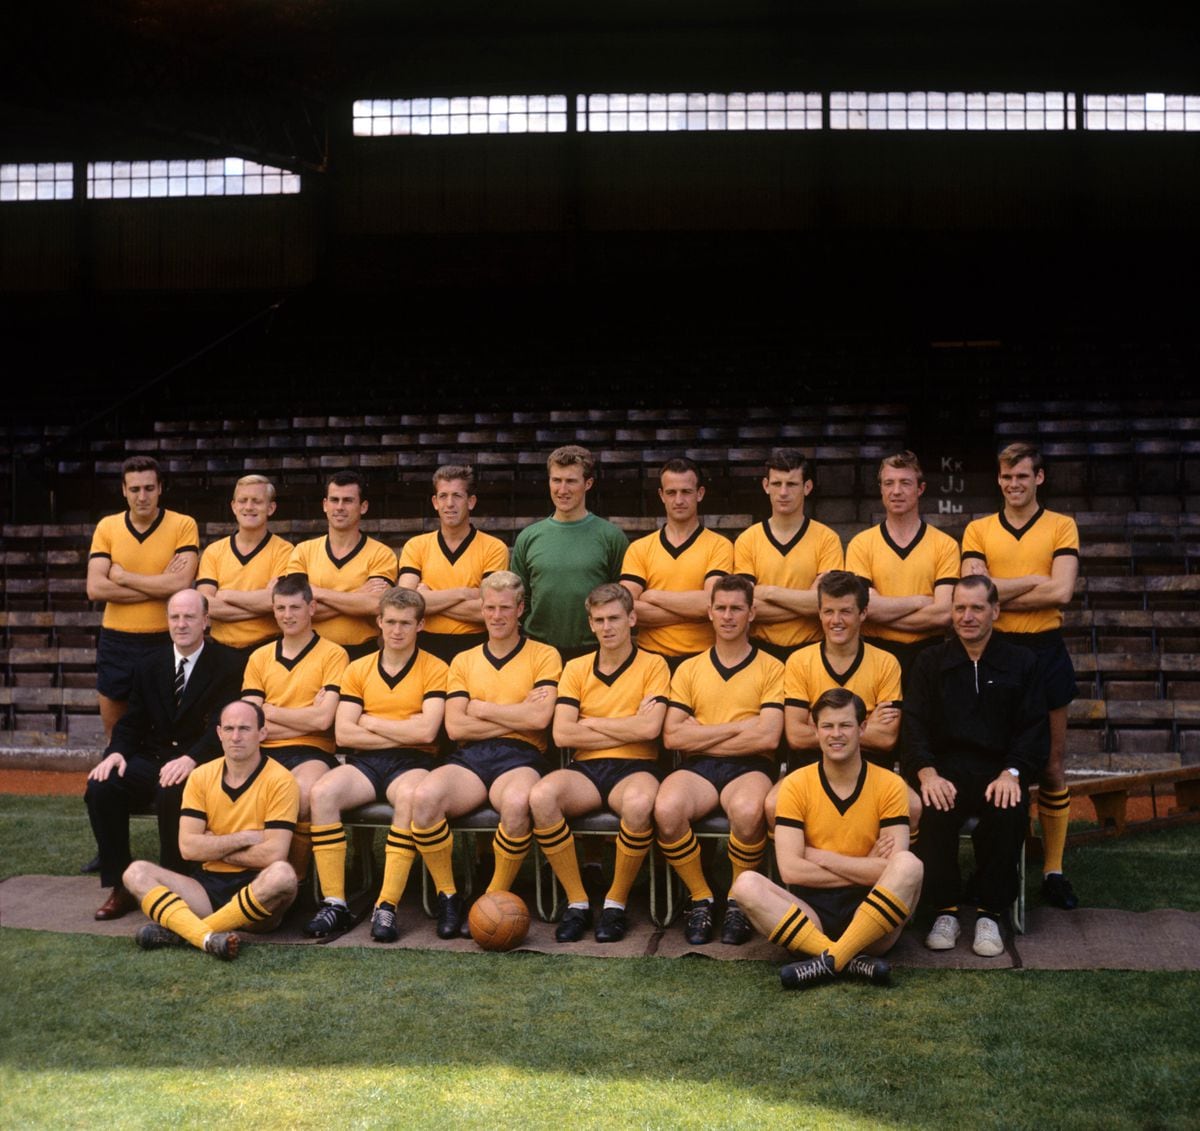 Wolverhampton Wanderers FC 1964-65. Ron Flowers can be seen in the middle row.